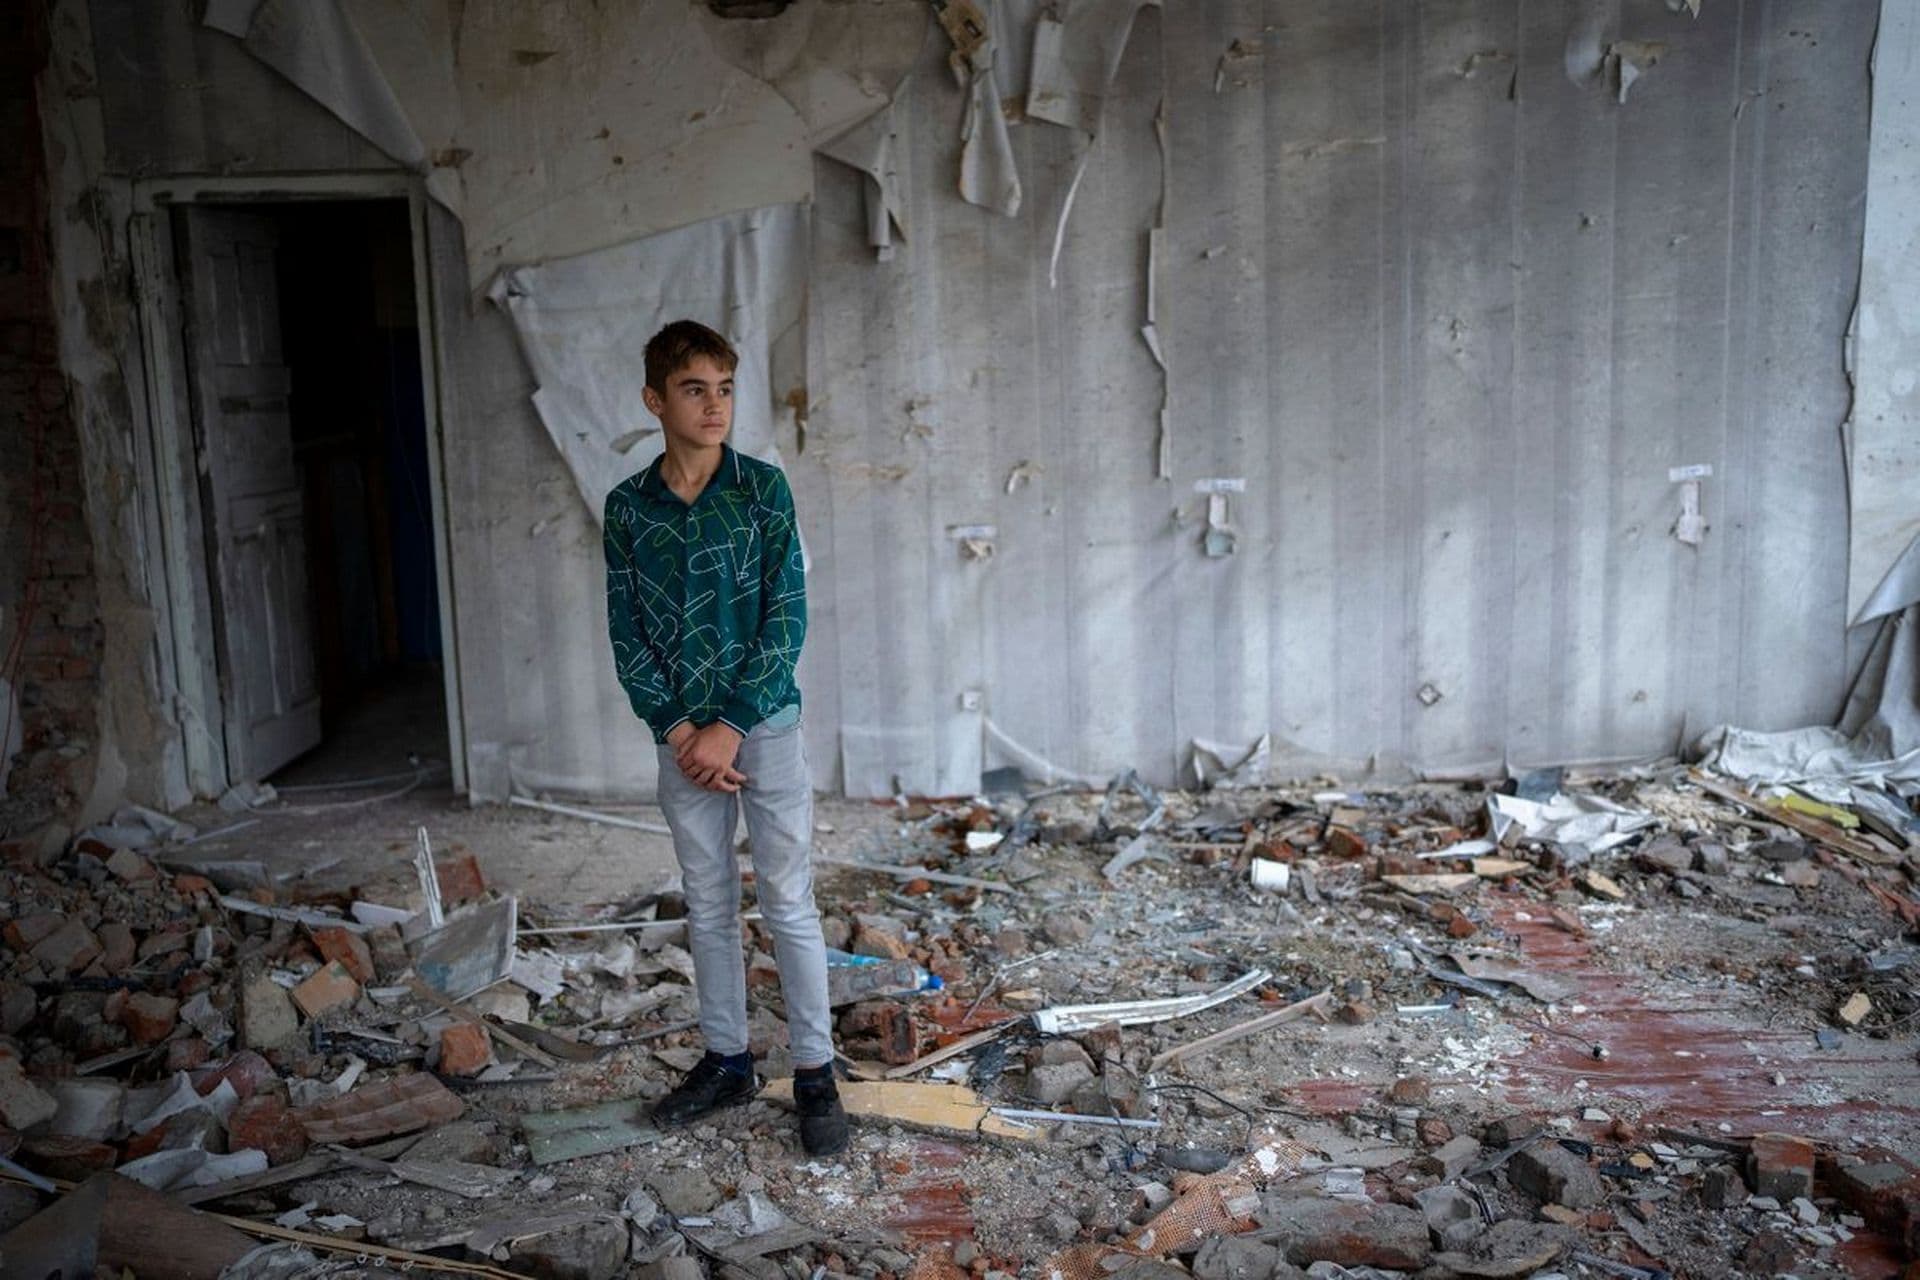 Oleksii Lytvyn stands in the rubble of his former classroom, in the same position where his desk sat before the Mykhailo-Kotsyubynske's lyceum was bombed by Russian forces on March 4, in Chernihiv